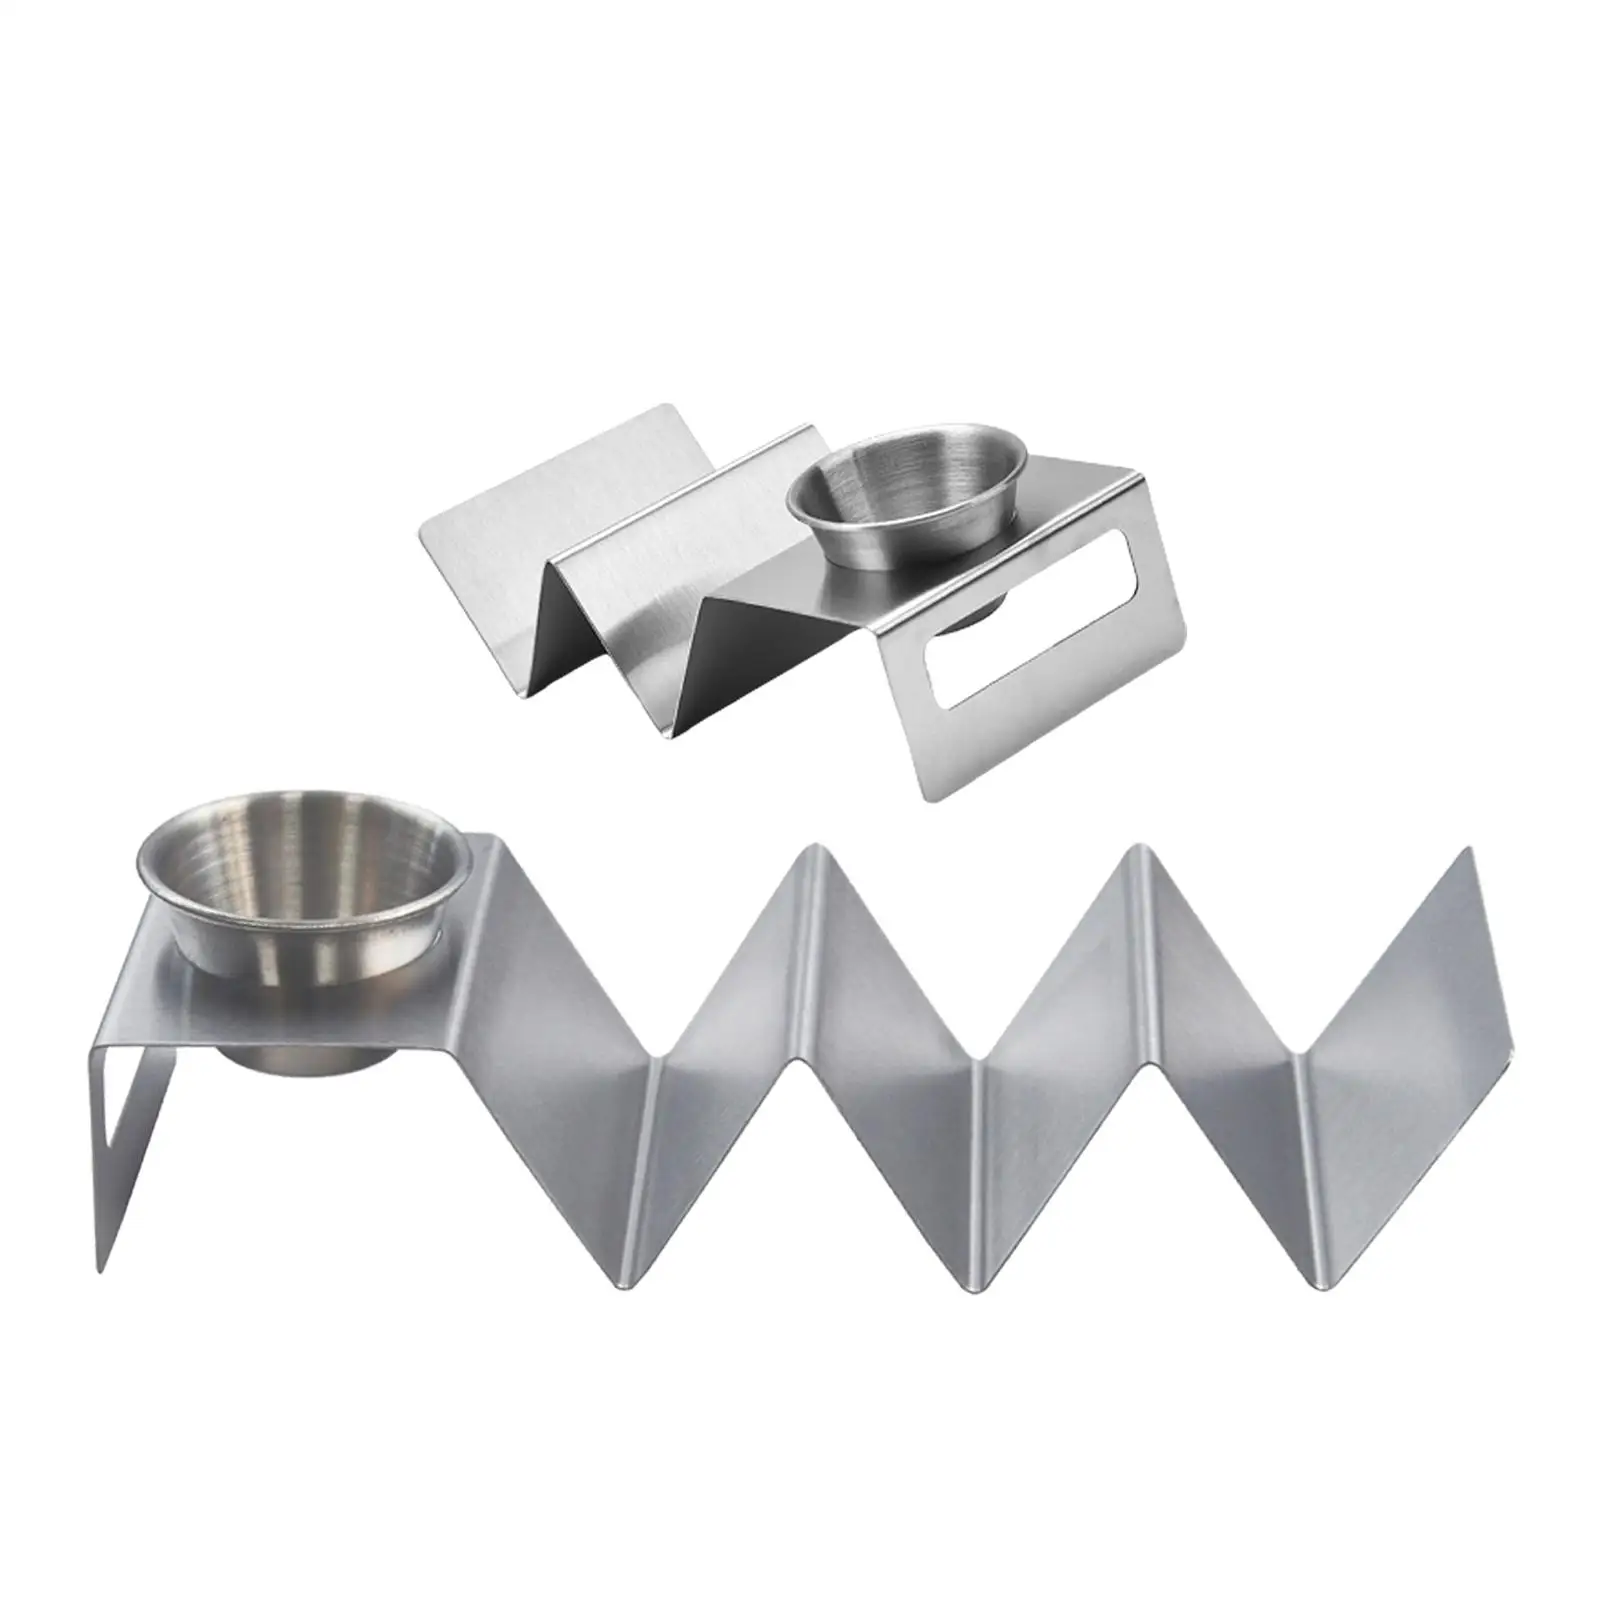 Stainless Steel Taco Tray Holder W Shape Plate and  Dog Holder for Tortillas Restaurant, Home Pancakes Mexican Food Oven Grill